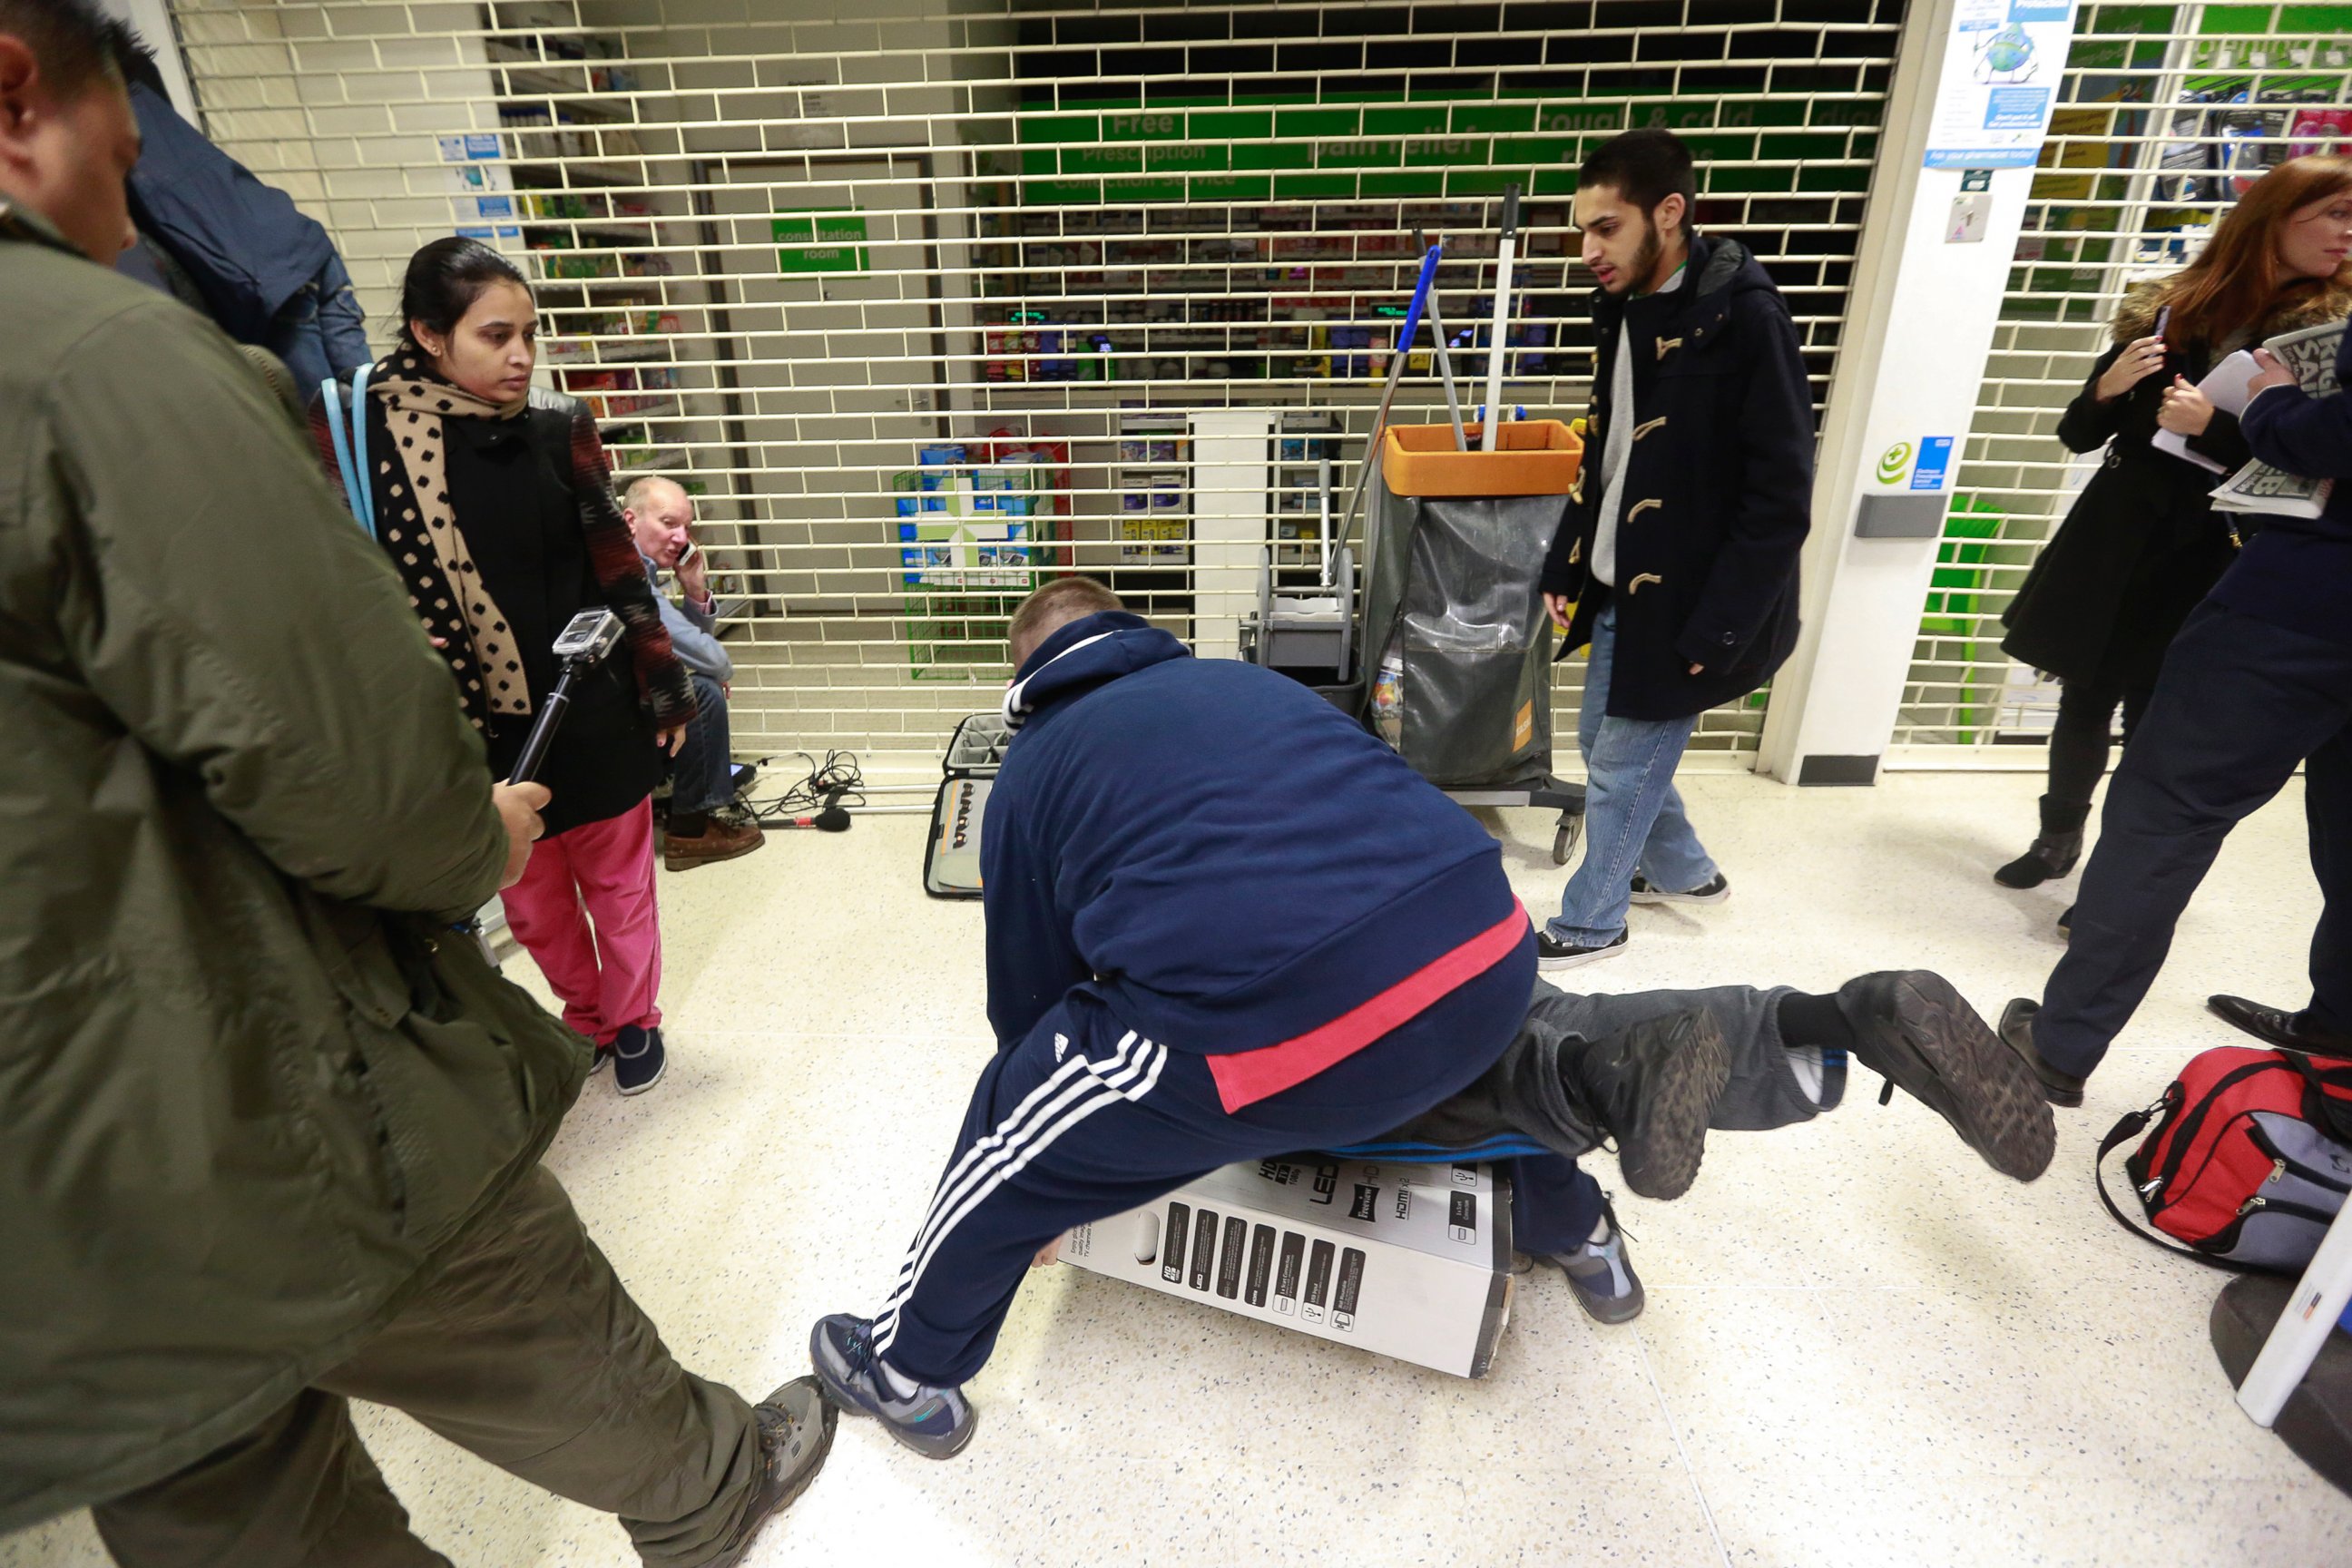 PHOTO: Customers fall to the floor as they grapple for an LED television during a Black Friday discount sale at an Asda supermarket in London on Nov. 28, 2014.